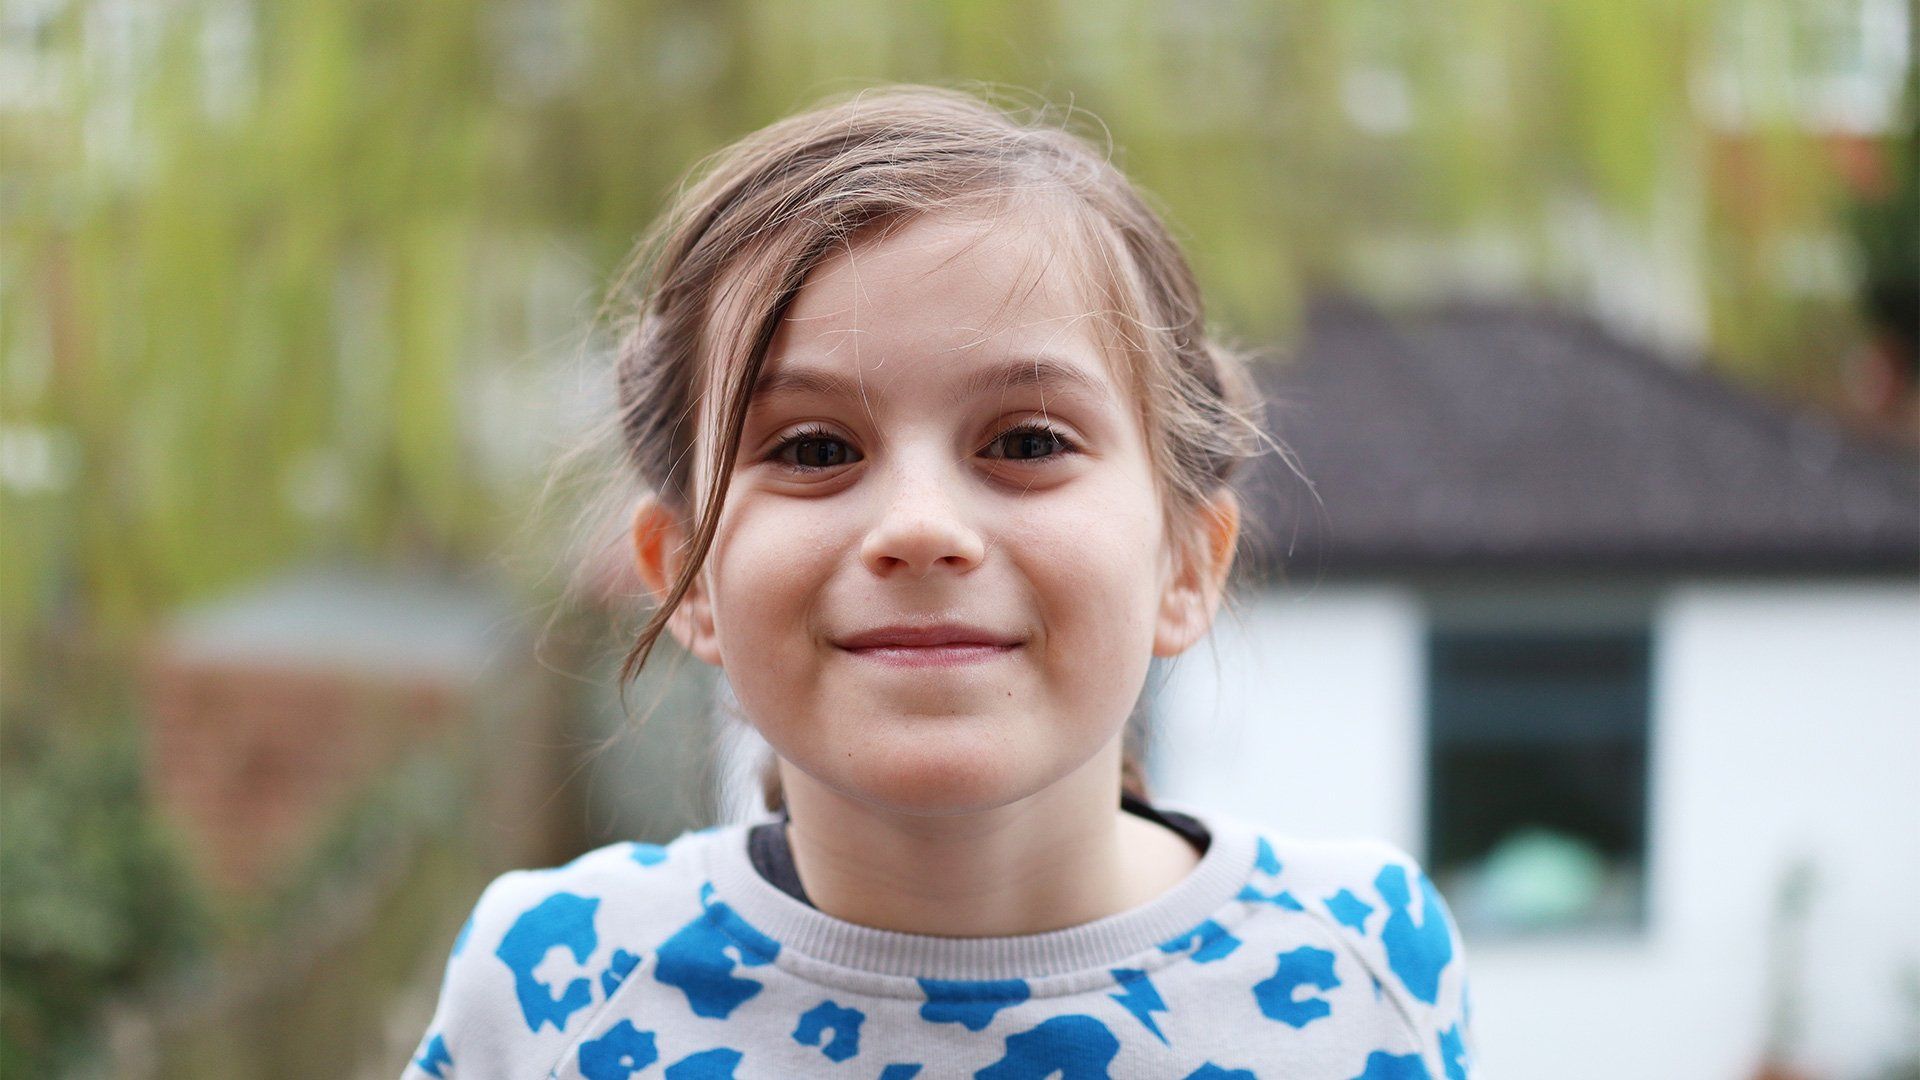 A portrait of a girl smiling, the background blurred. Taken on a Canon EOS M50 by Katja Gaskell.